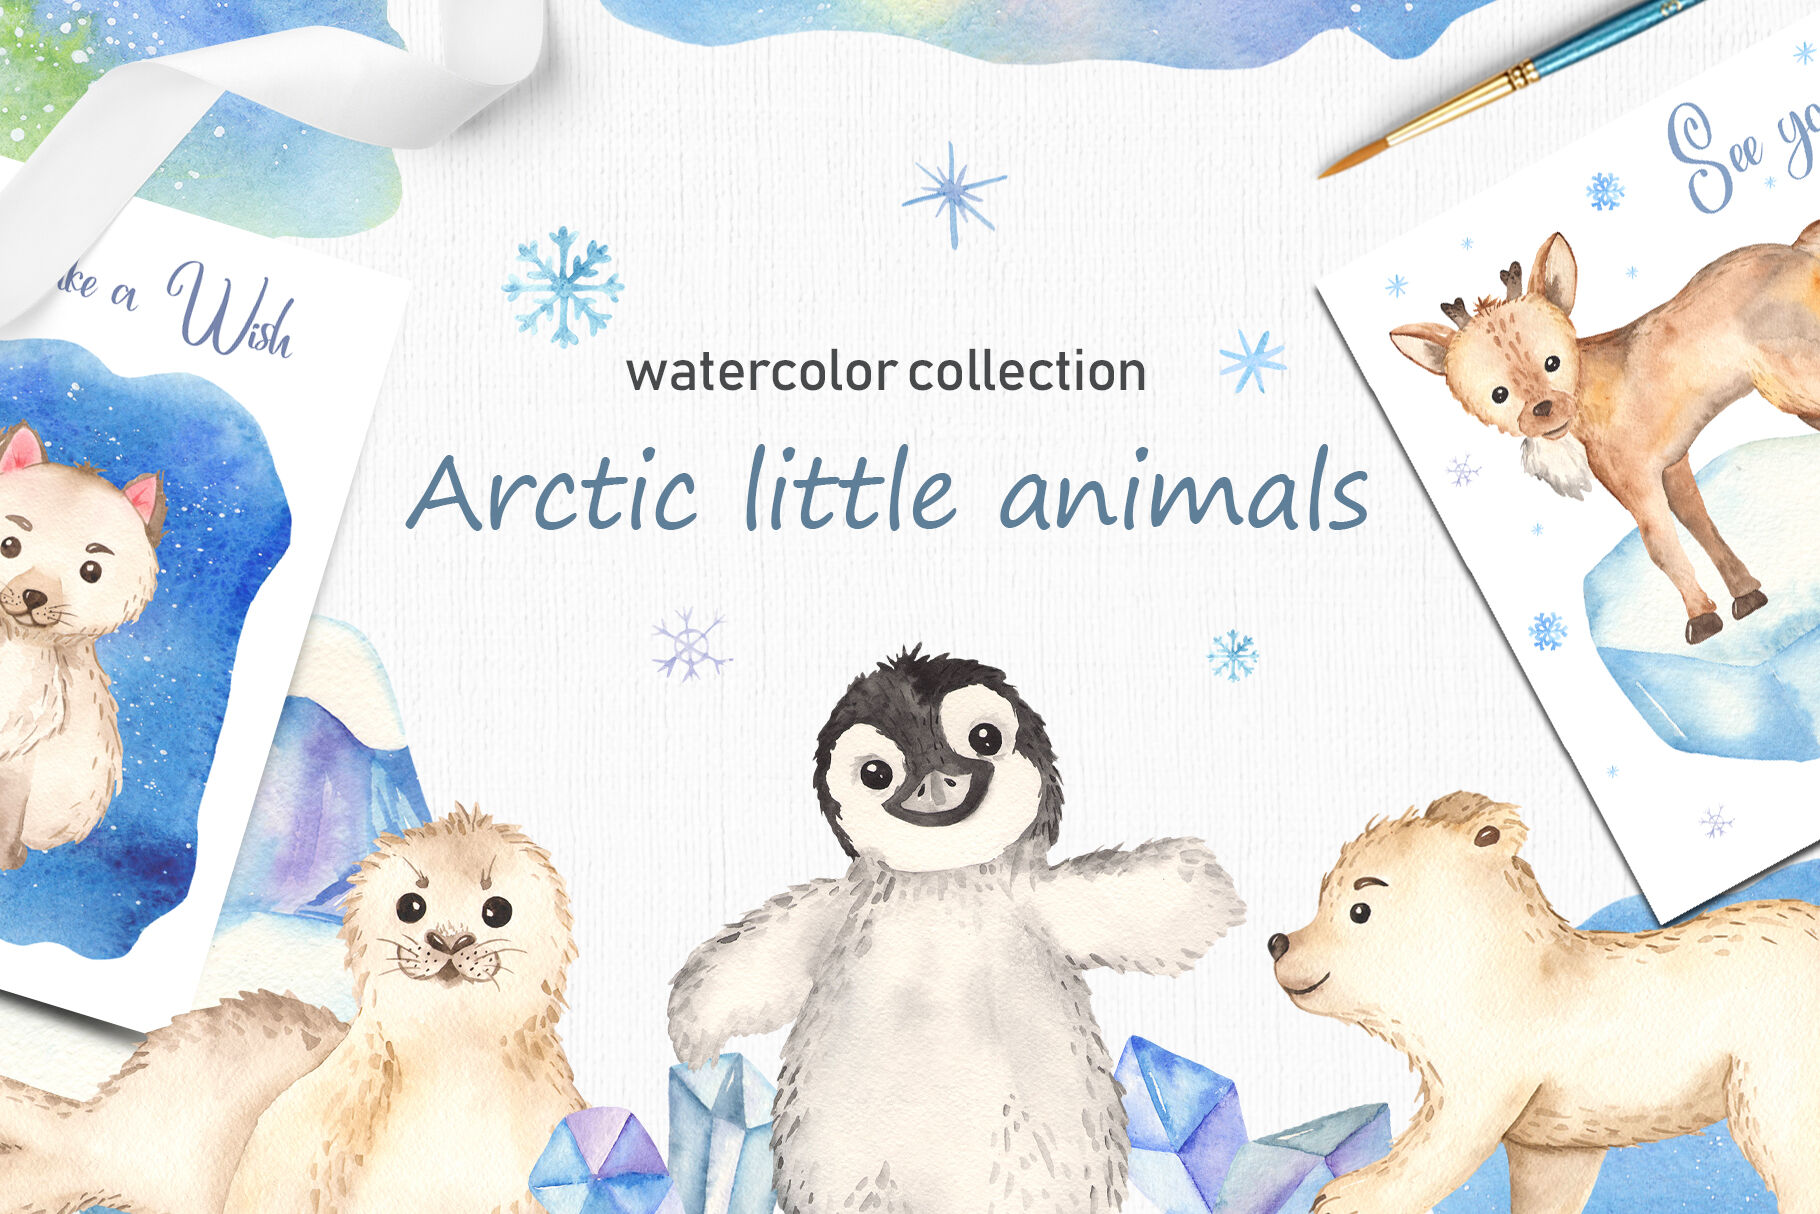 Arctic little animals watercolor collection clipart By.